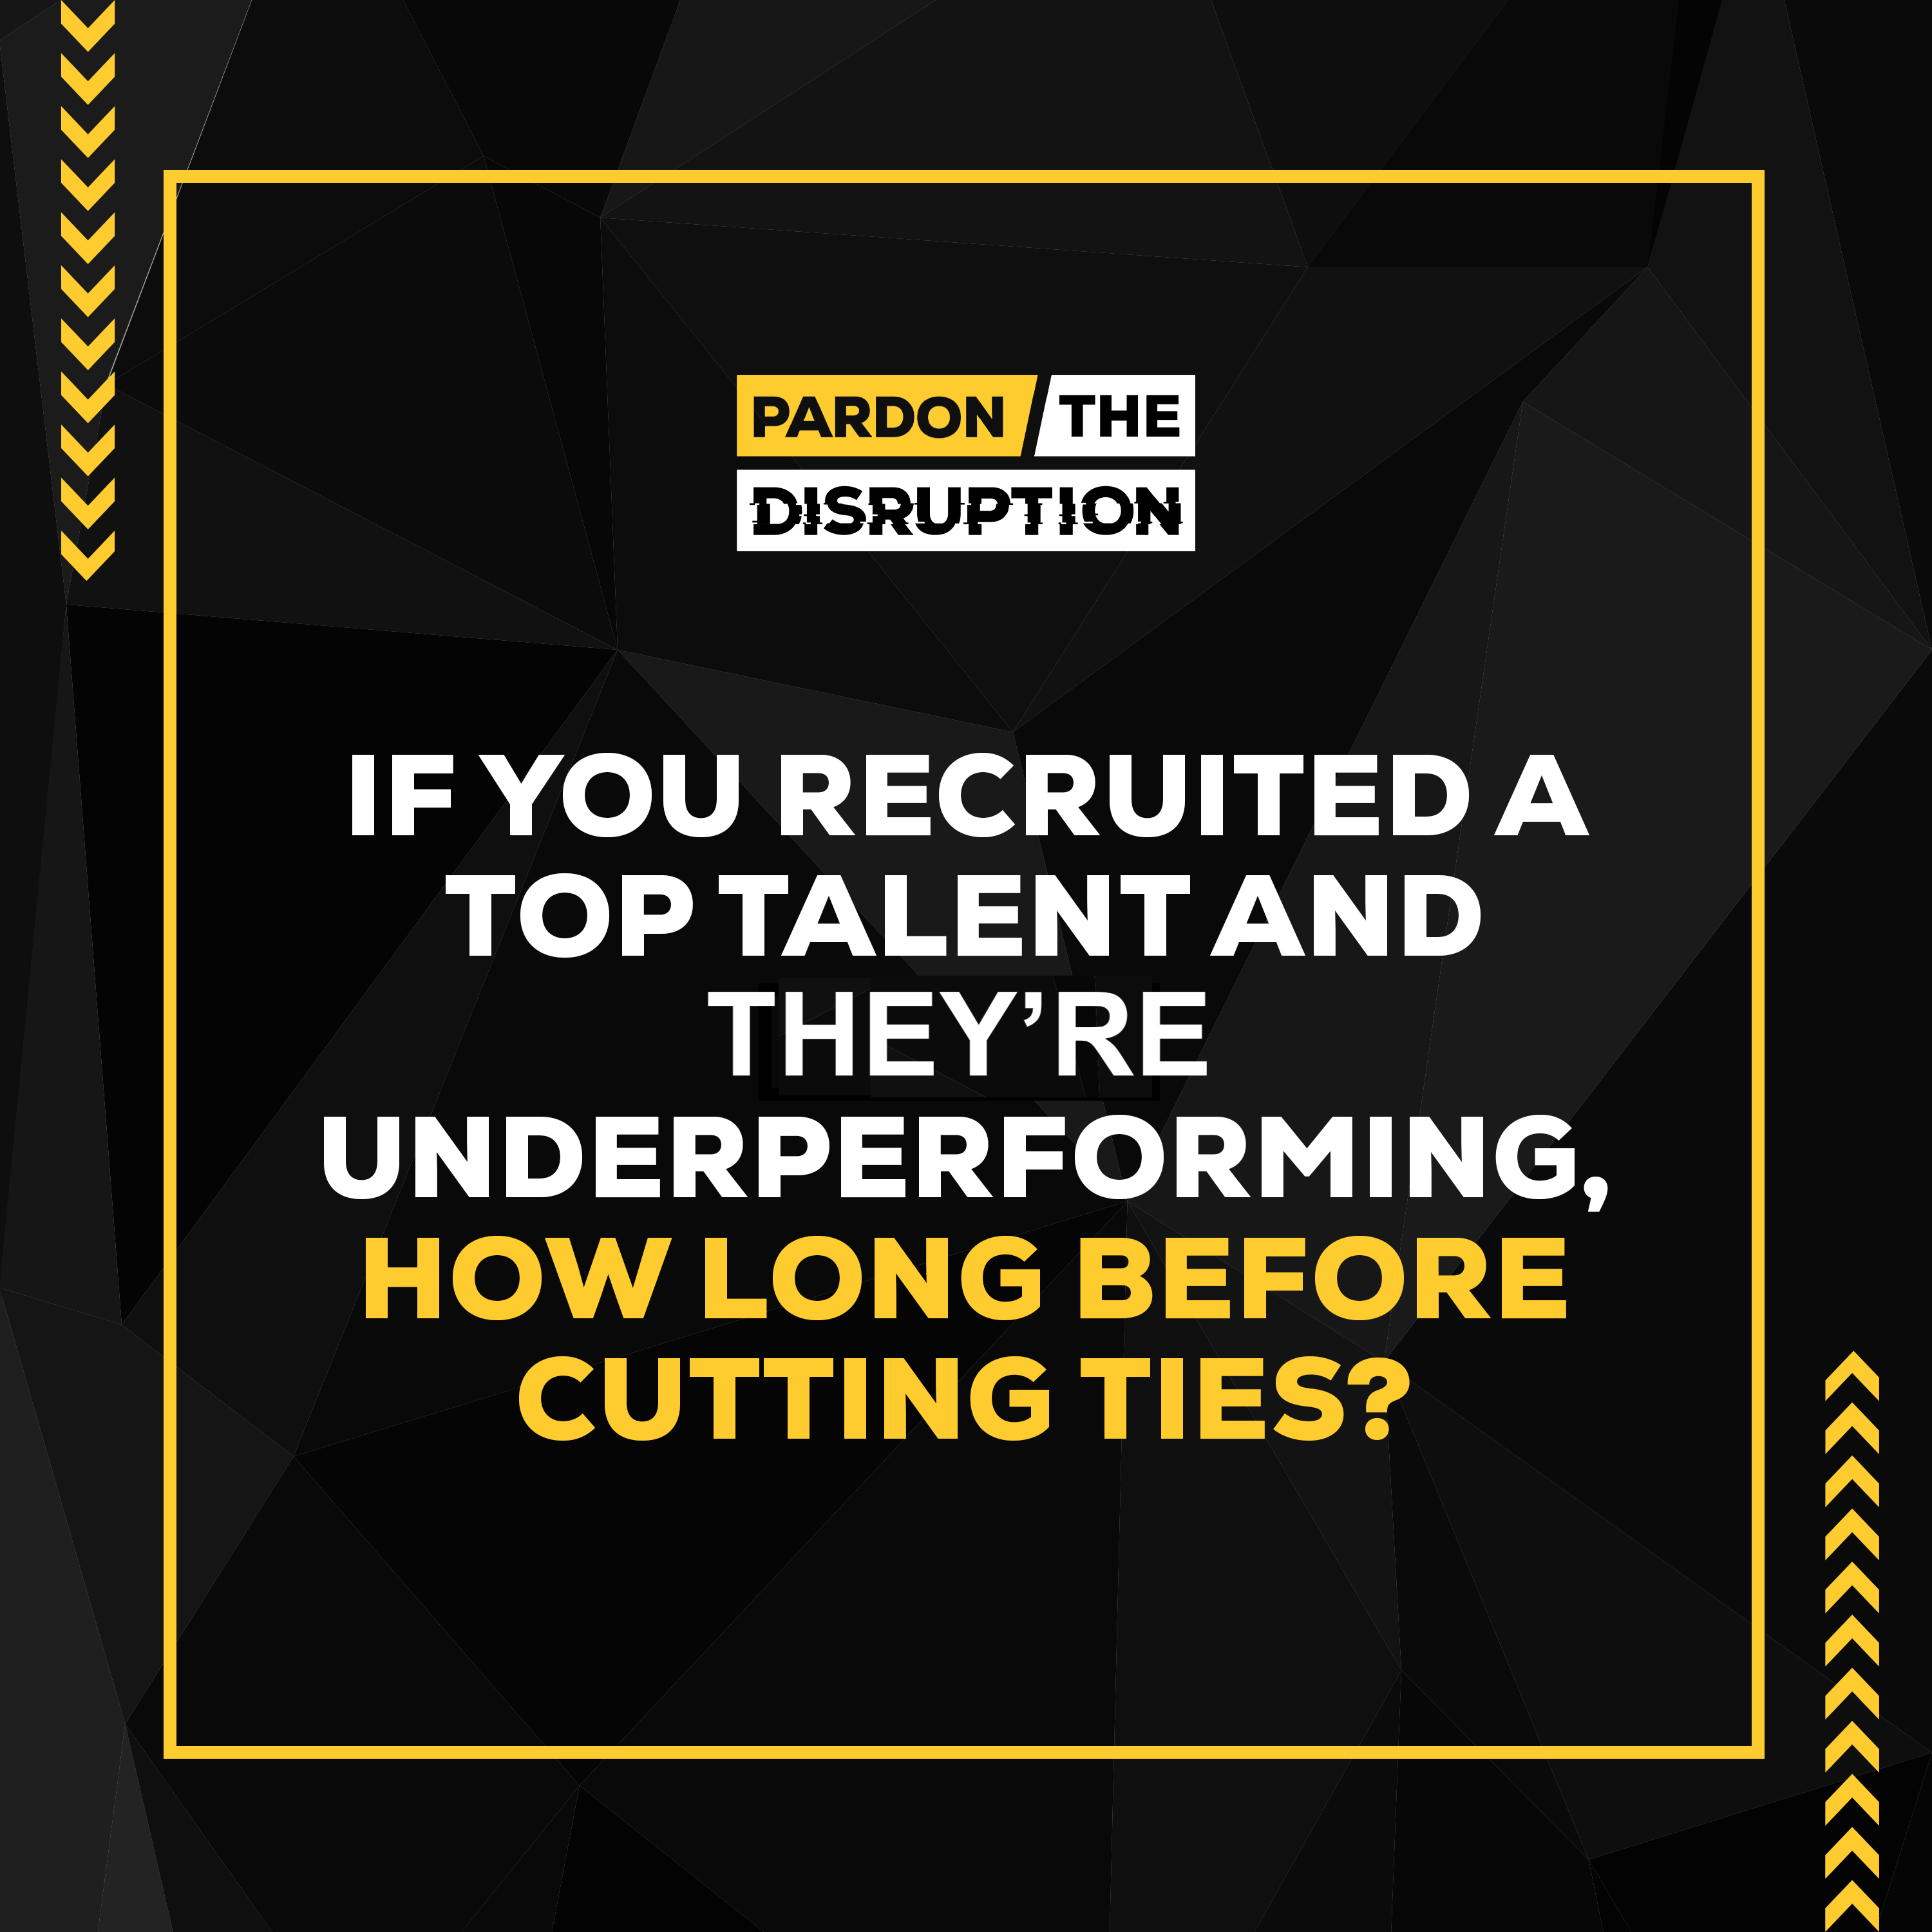 If You Recruited A Top Talent And They're Underperforming, How Long Before Cutting Ties?